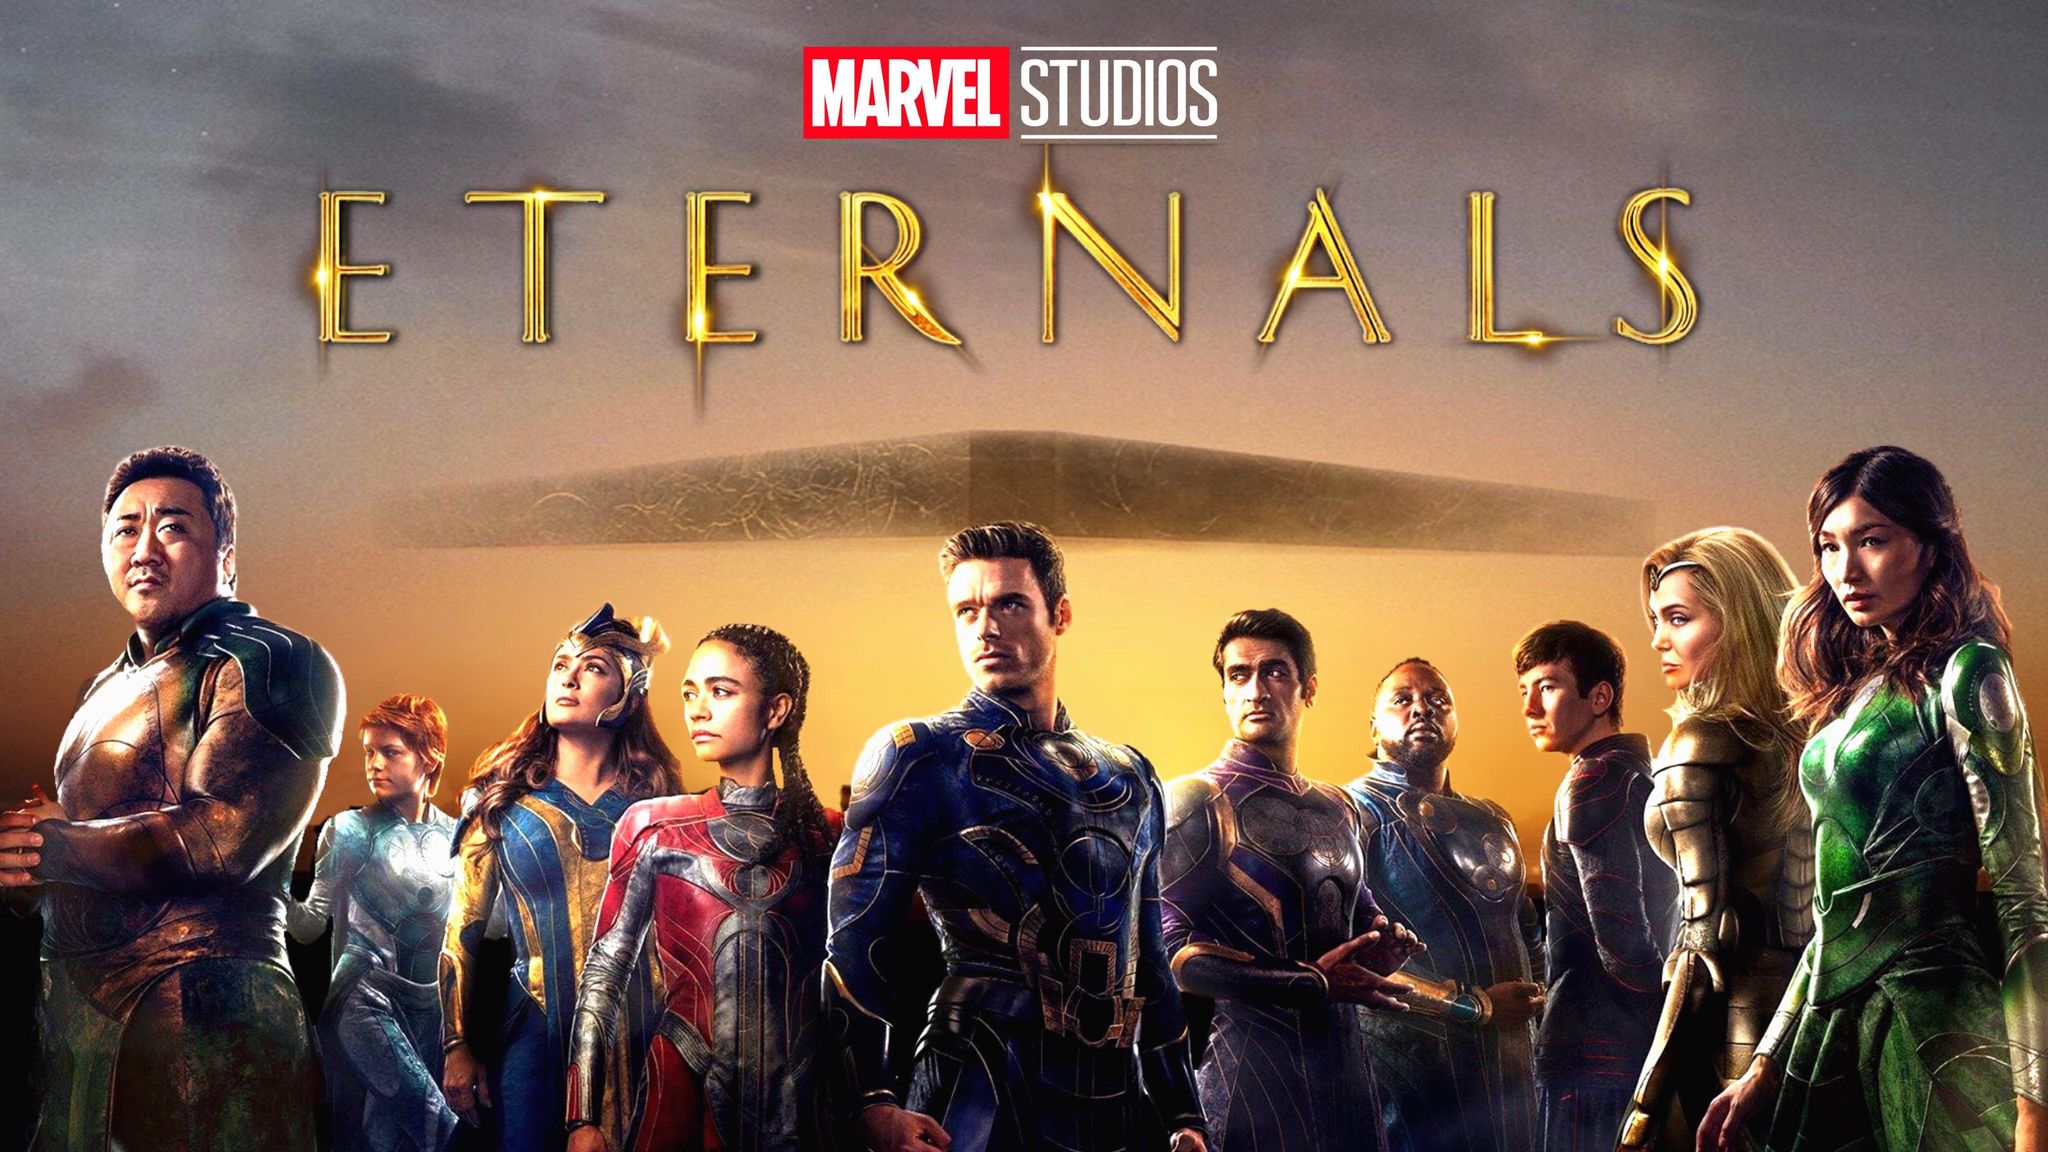 Thanos and Avengers: Endgame Referenced in New Marvel's Eternals Clip